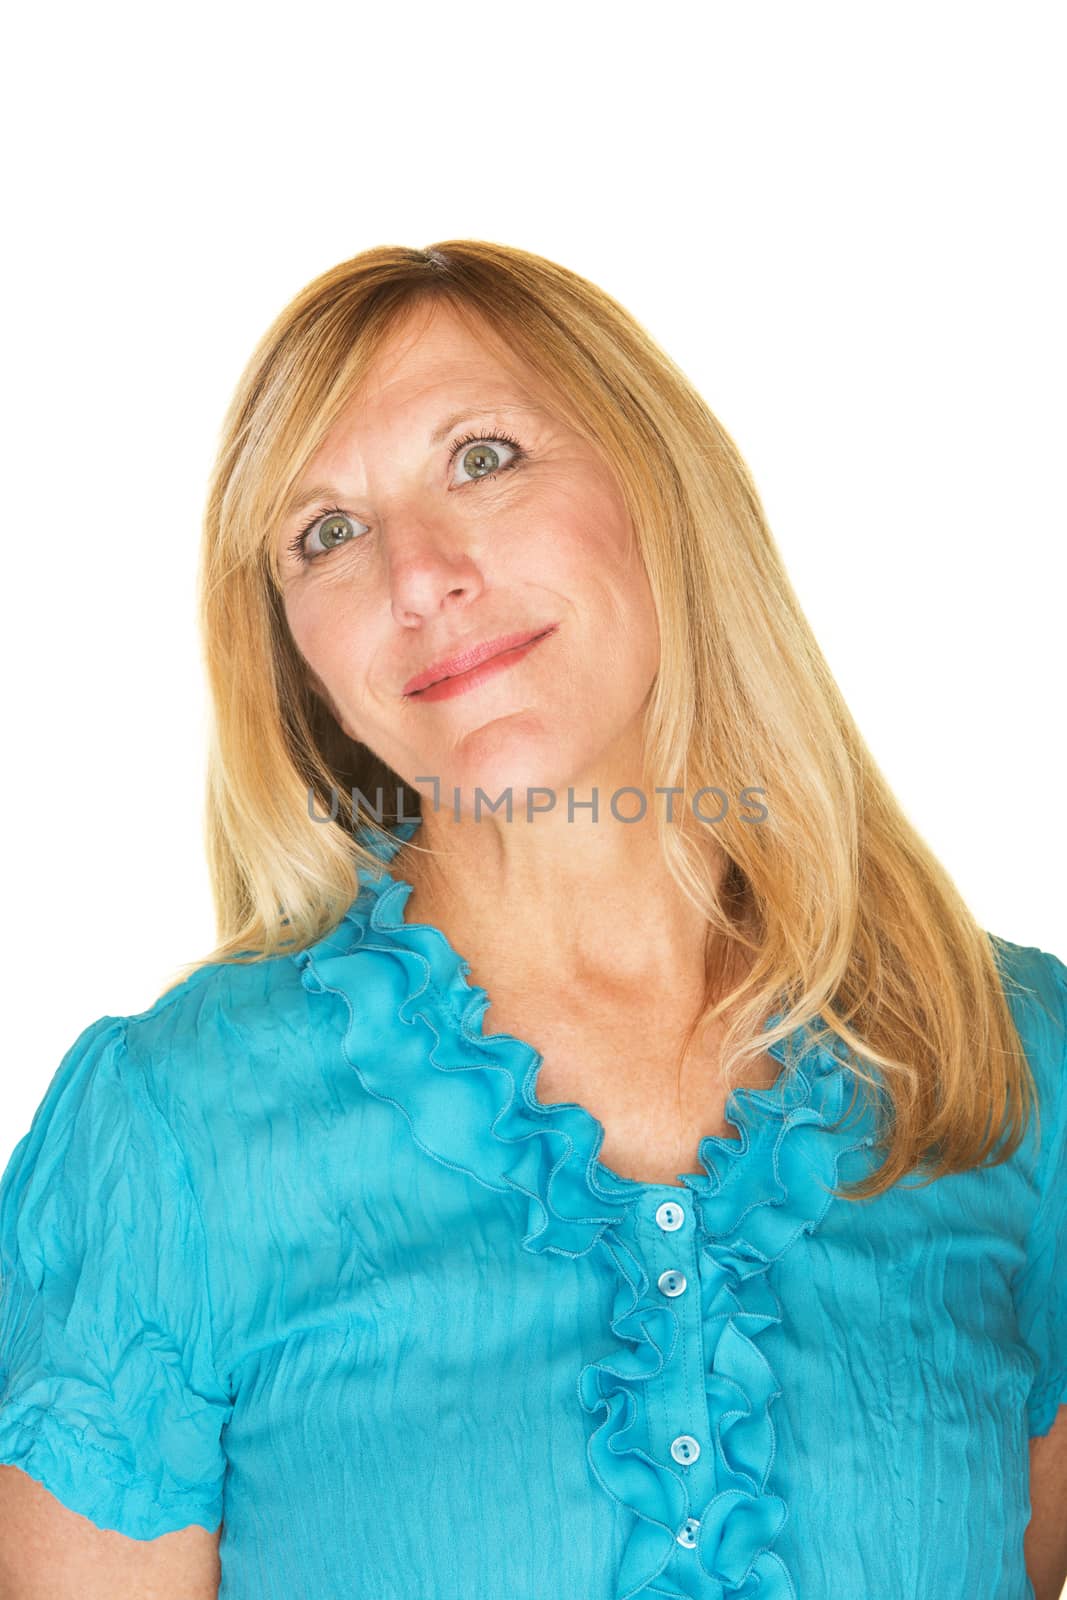 Daydreaming white female in blue over white background